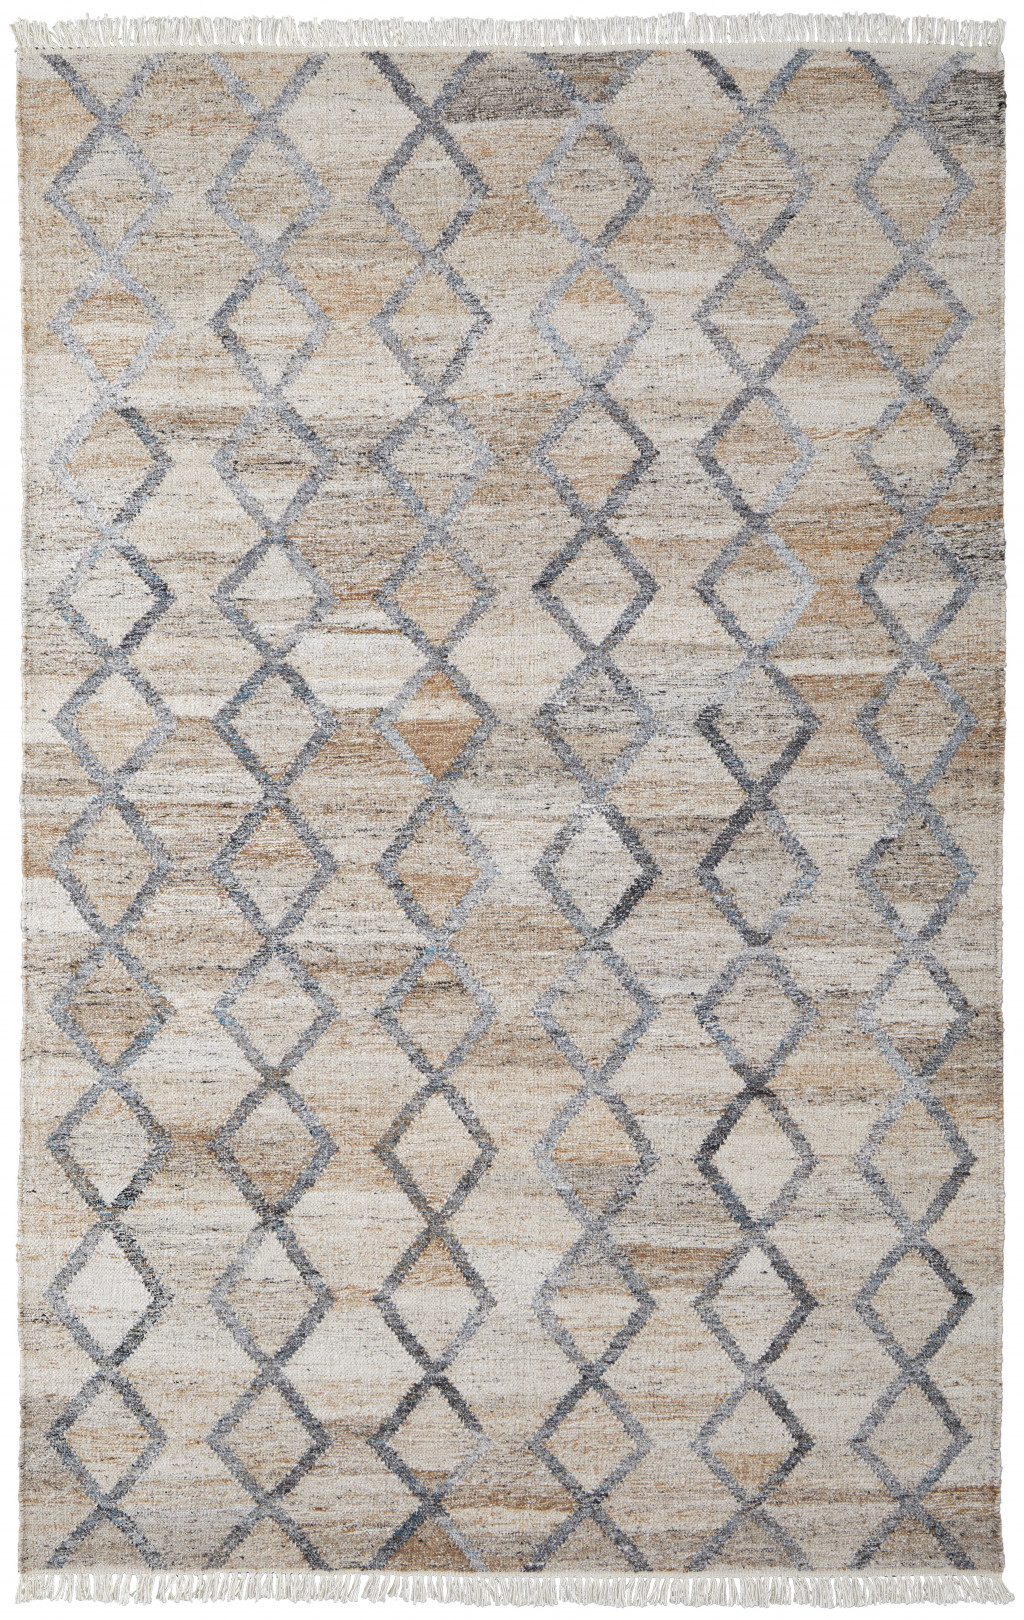 8' X 10' Gray Ivory And Tan Geometric Hand Woven Stain Resistant Area Rug With Fringe-512430-1